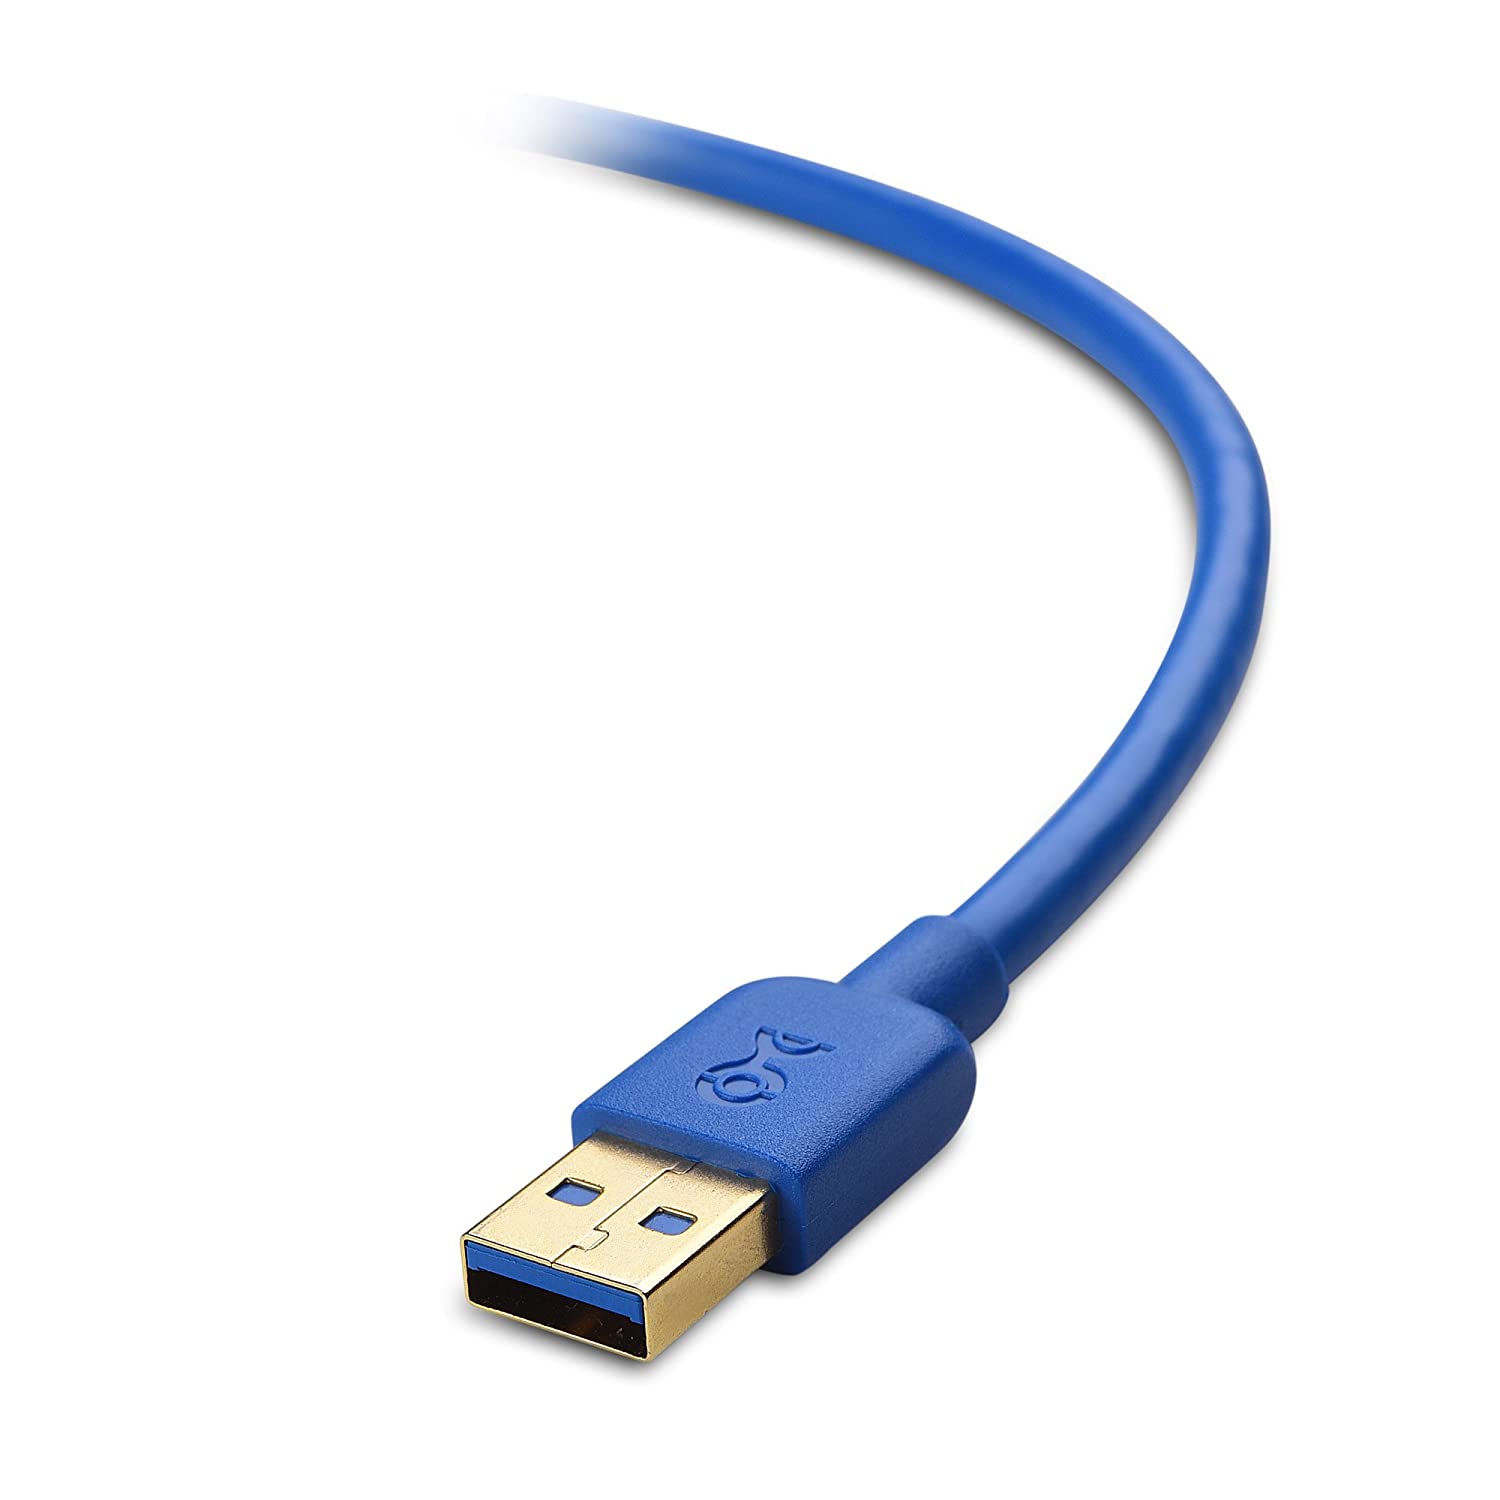 Cable Matters USB 3.0 Cable (USB to USB Cable Male to Male) in Blue 10 Feet - image 4 of 4